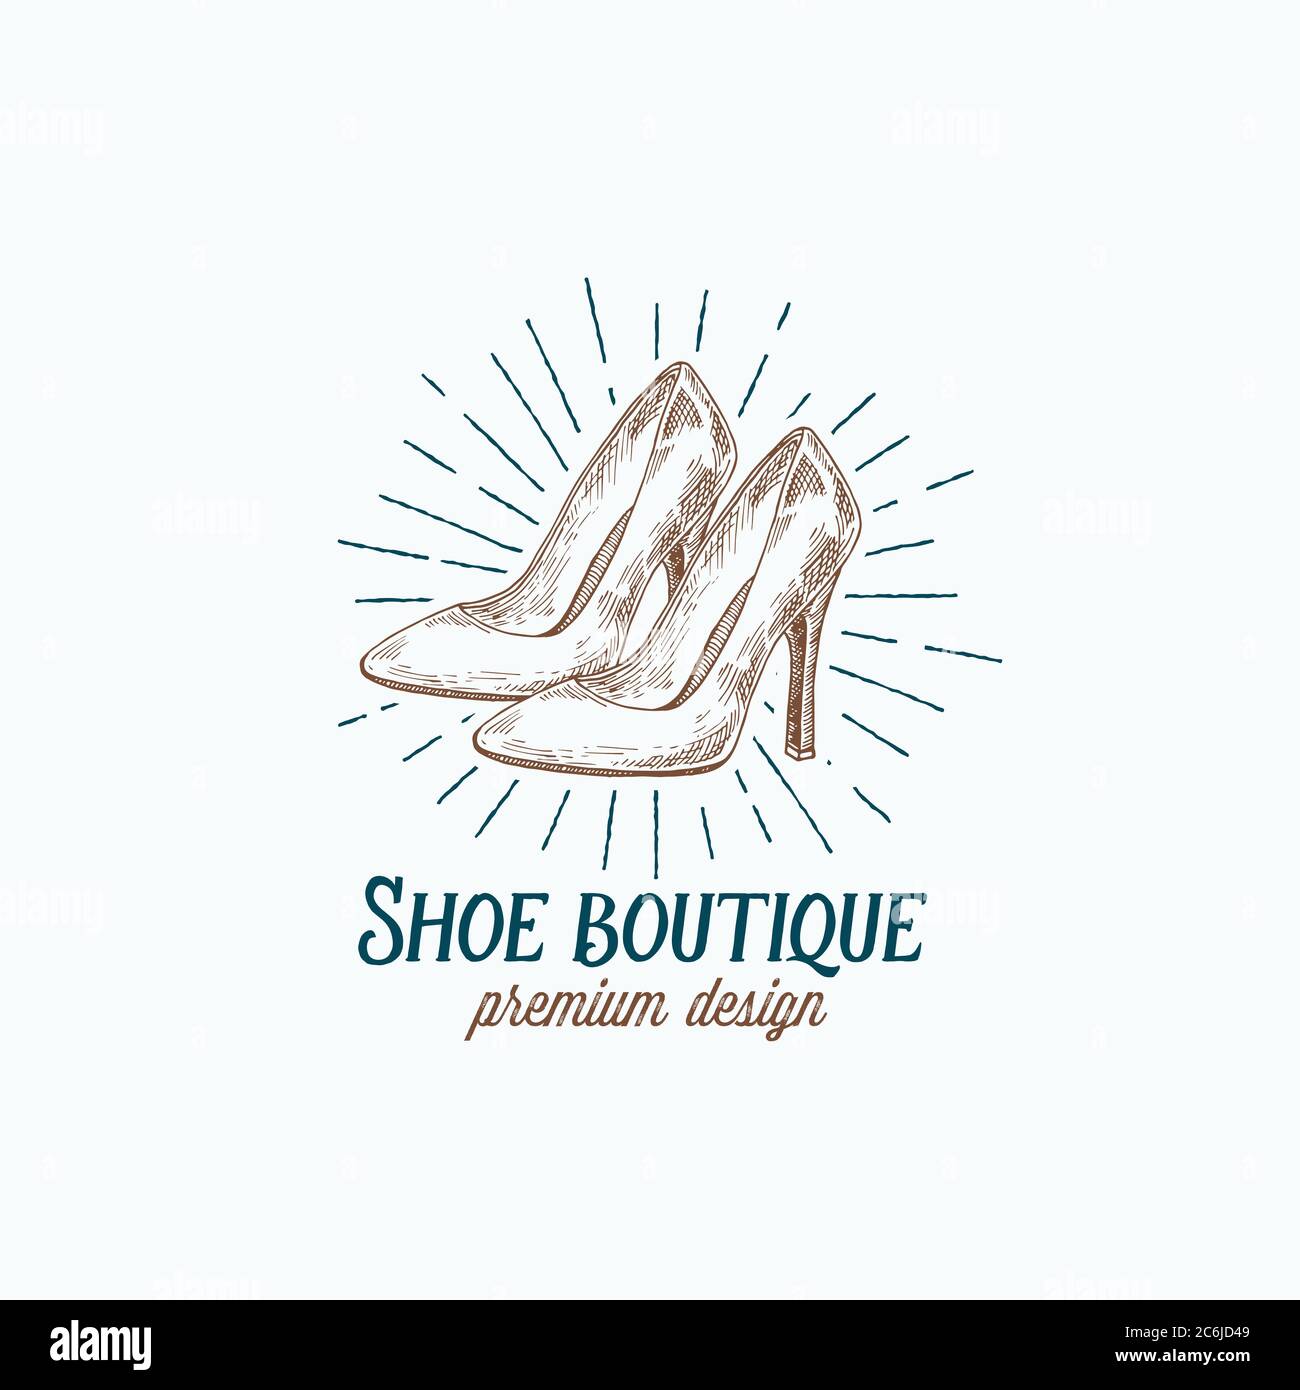 Shoe Boutique Retro Vector Sign, Symbol or Logo Template. High Heels Women Shoes Illustration and Vintage Typography Emblem. Stock Vector